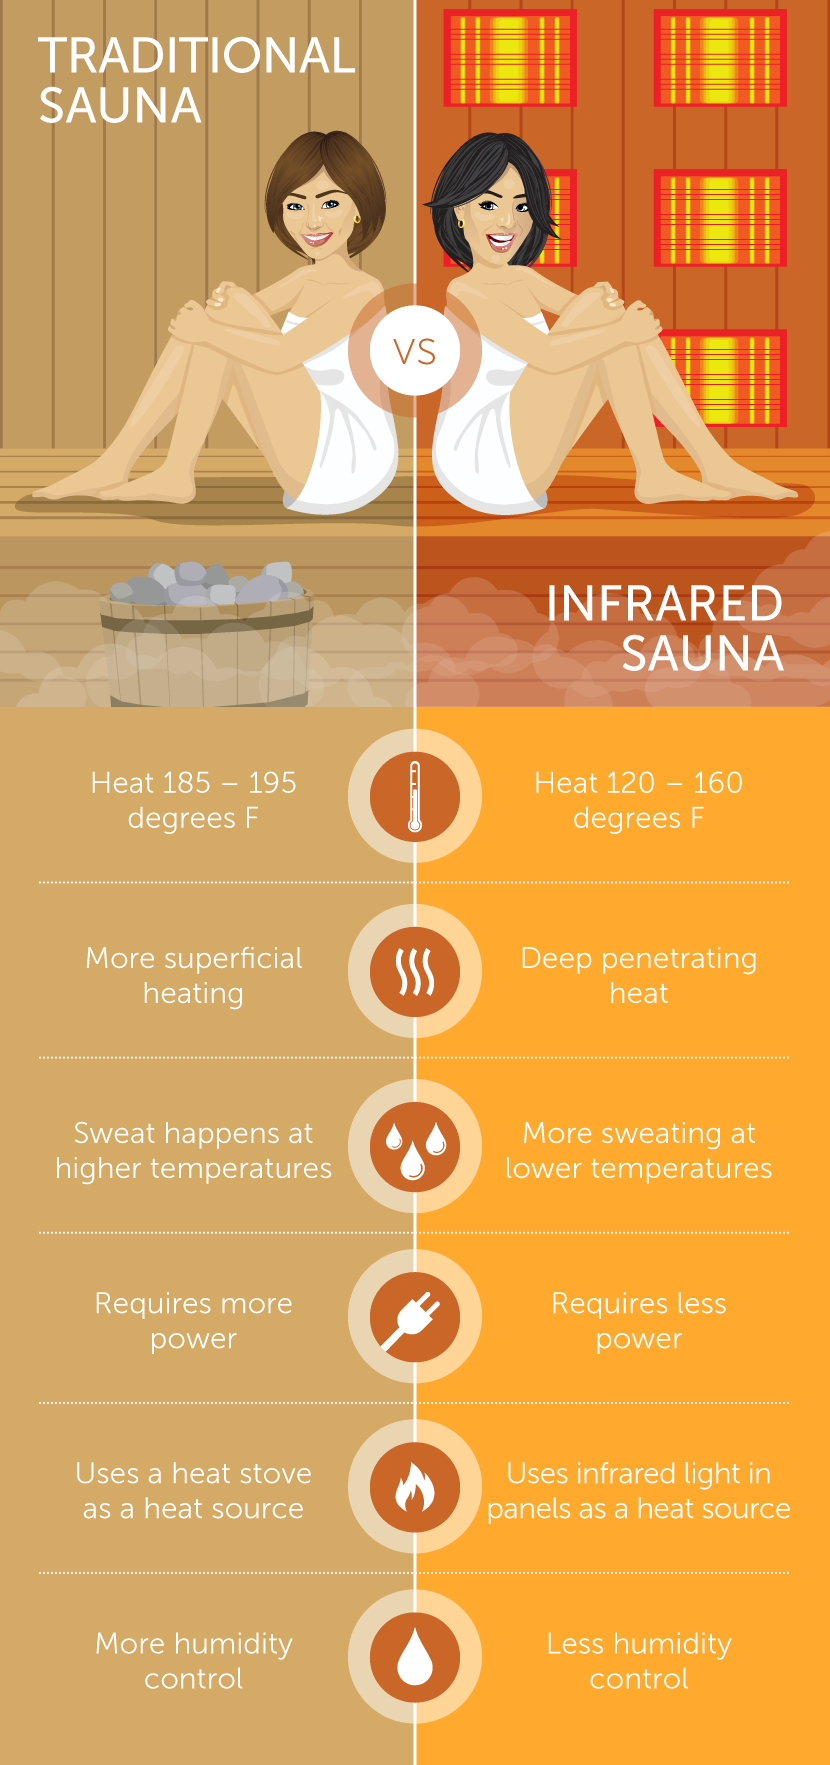 Are Saunas Good For You?